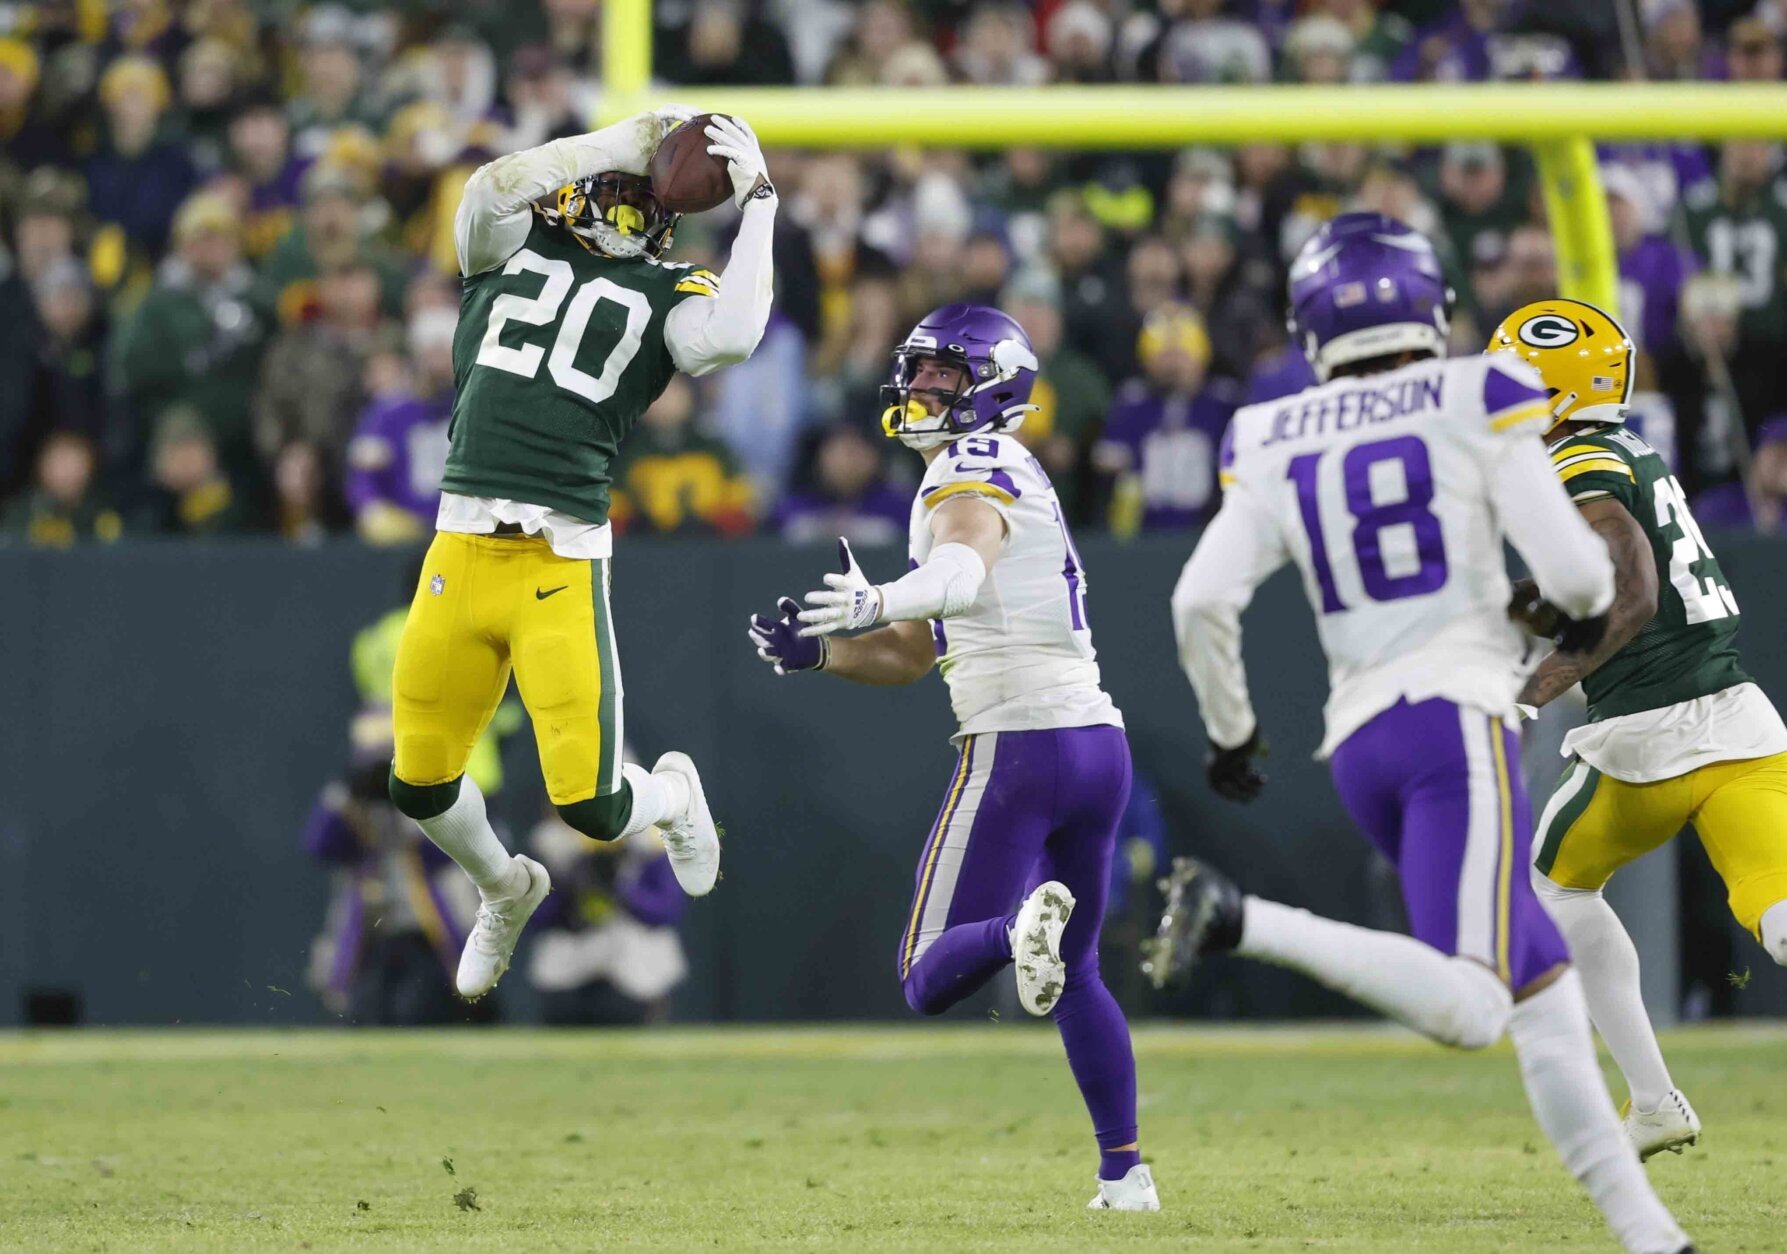 <p><b><i>Vikings 17</i></b><br />
<b><i>Packers 41</i></b></p>
<p>Green Bay is really about to make these damn playoffs, aren&#8217;t they? This would be the biggest upset since <a href="https://www.youtube.com/watch?v=wQKThExxrc0">Don Corleone survived his assassination attempt</a>.</p>
